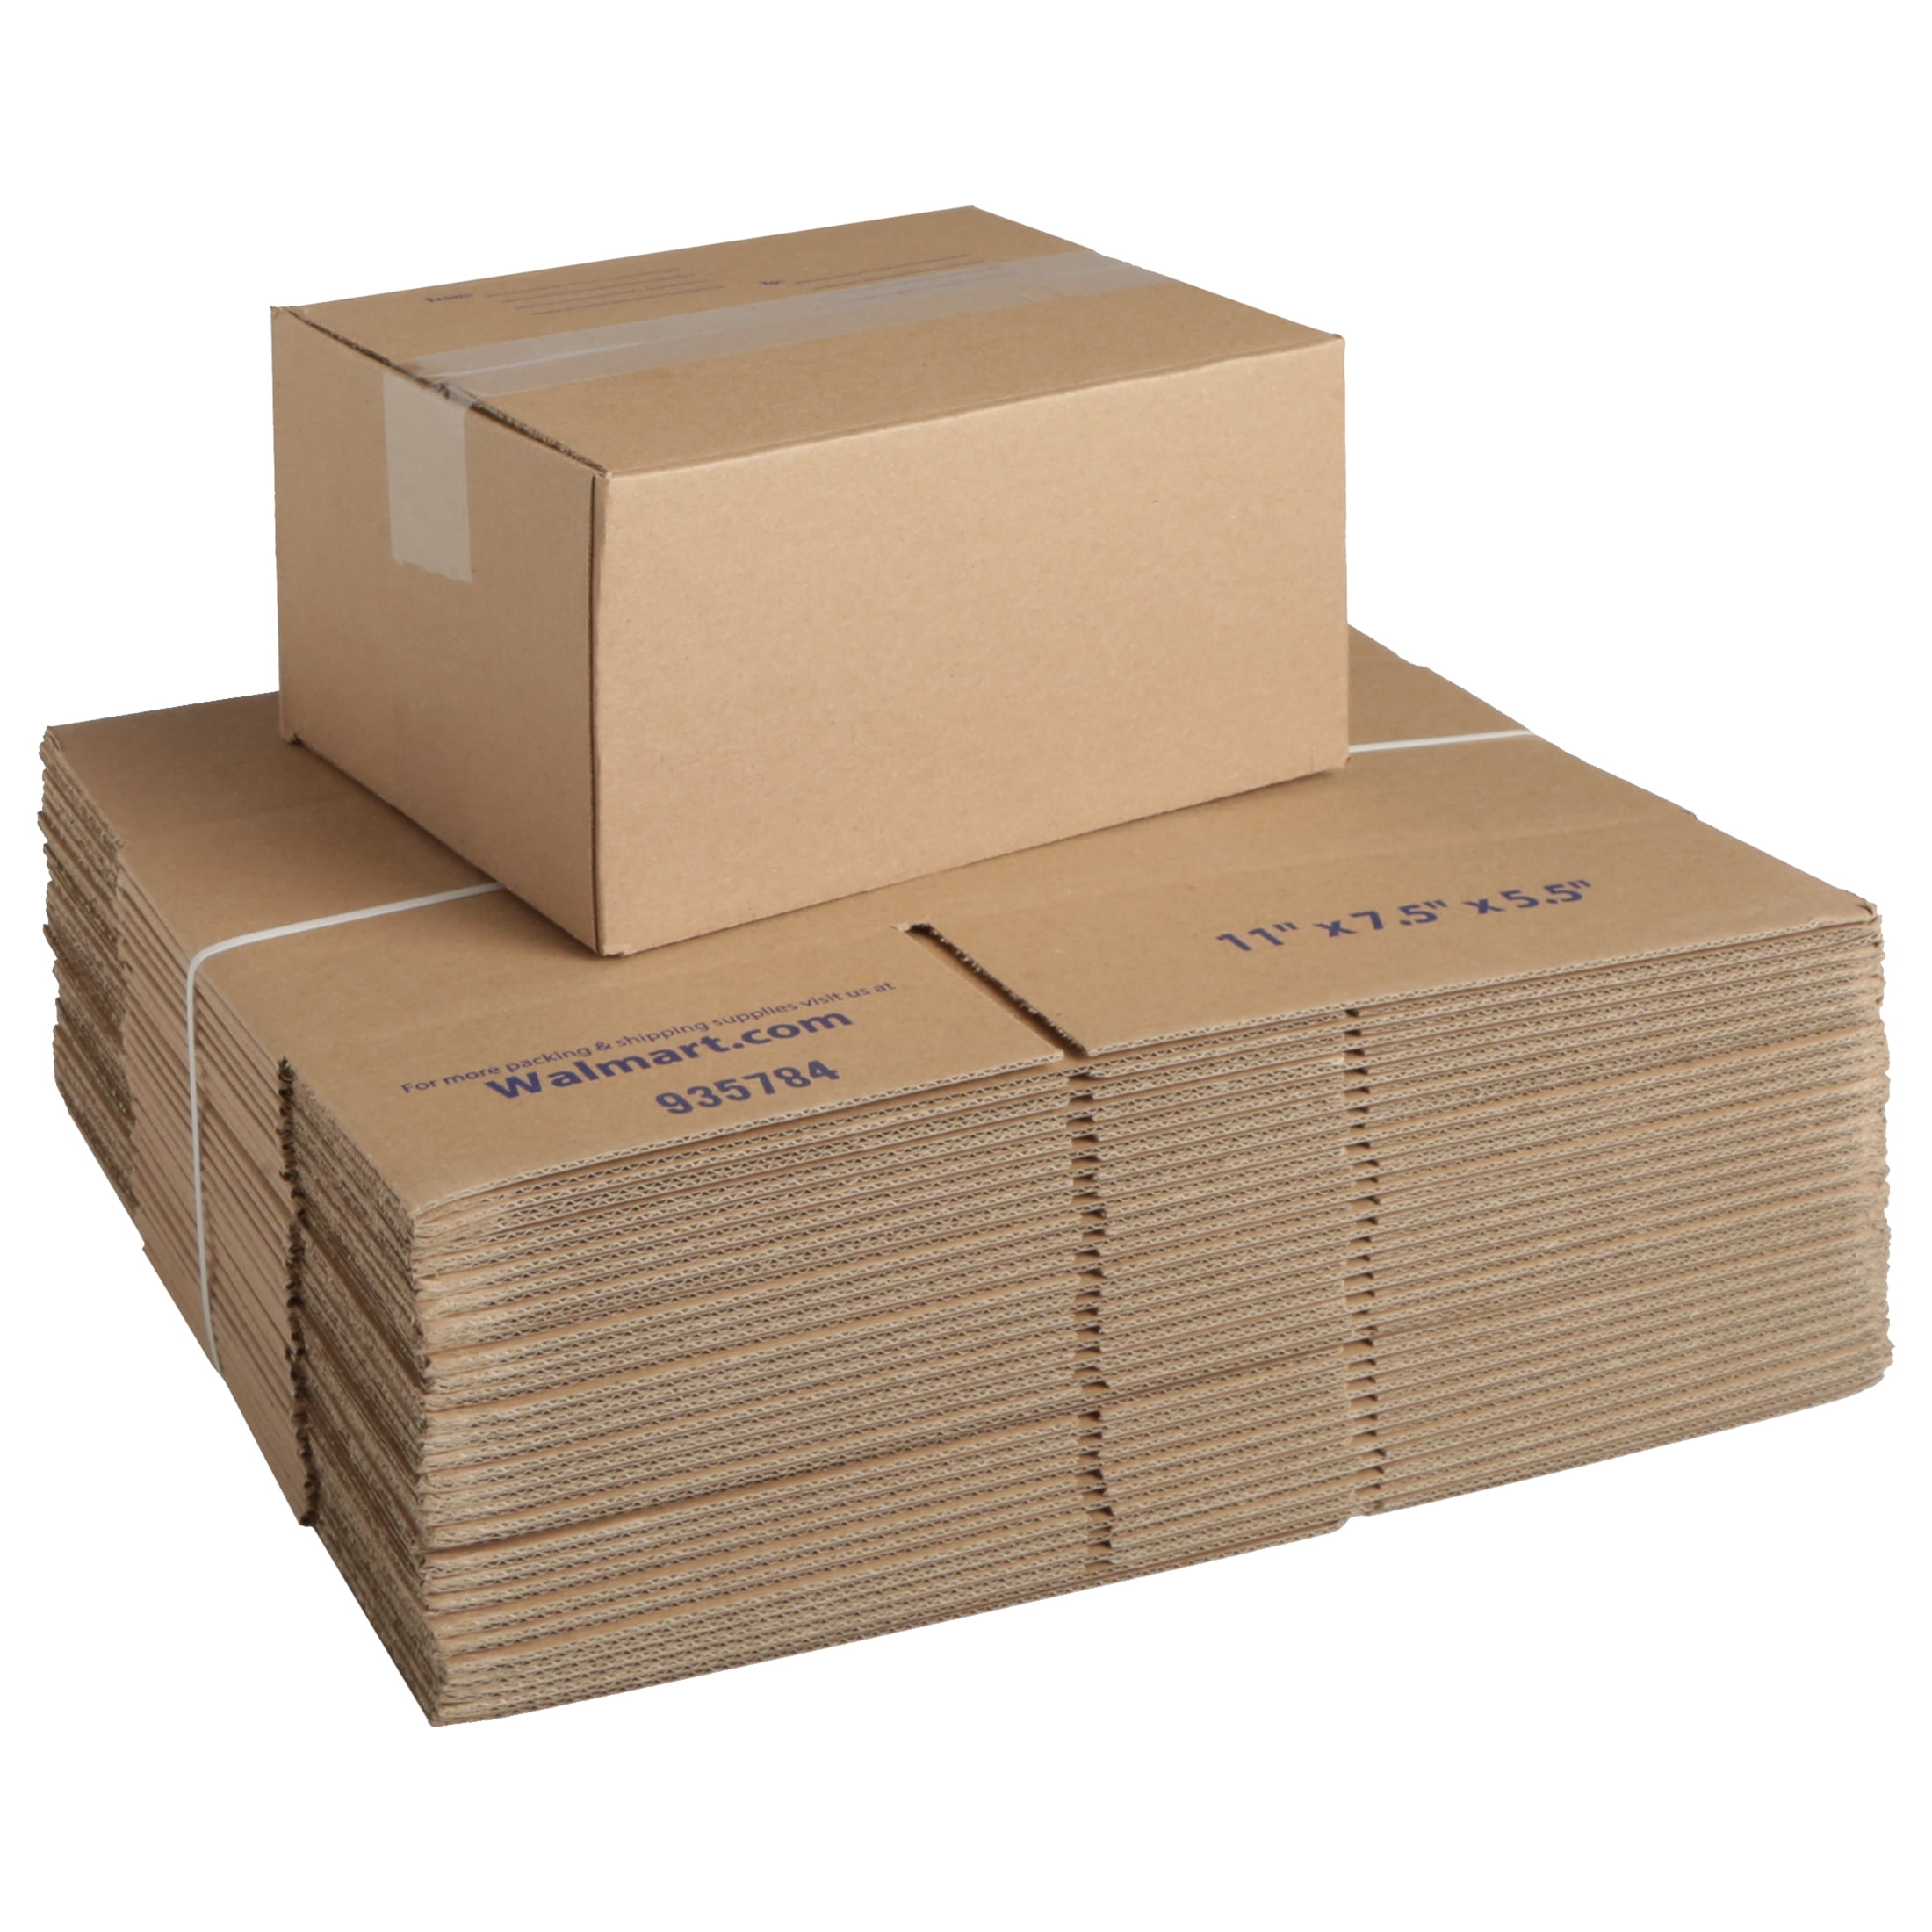 100 x Small Packaging Cardboard Boxes 4 x 4 x 4" SINGLE WALL cube